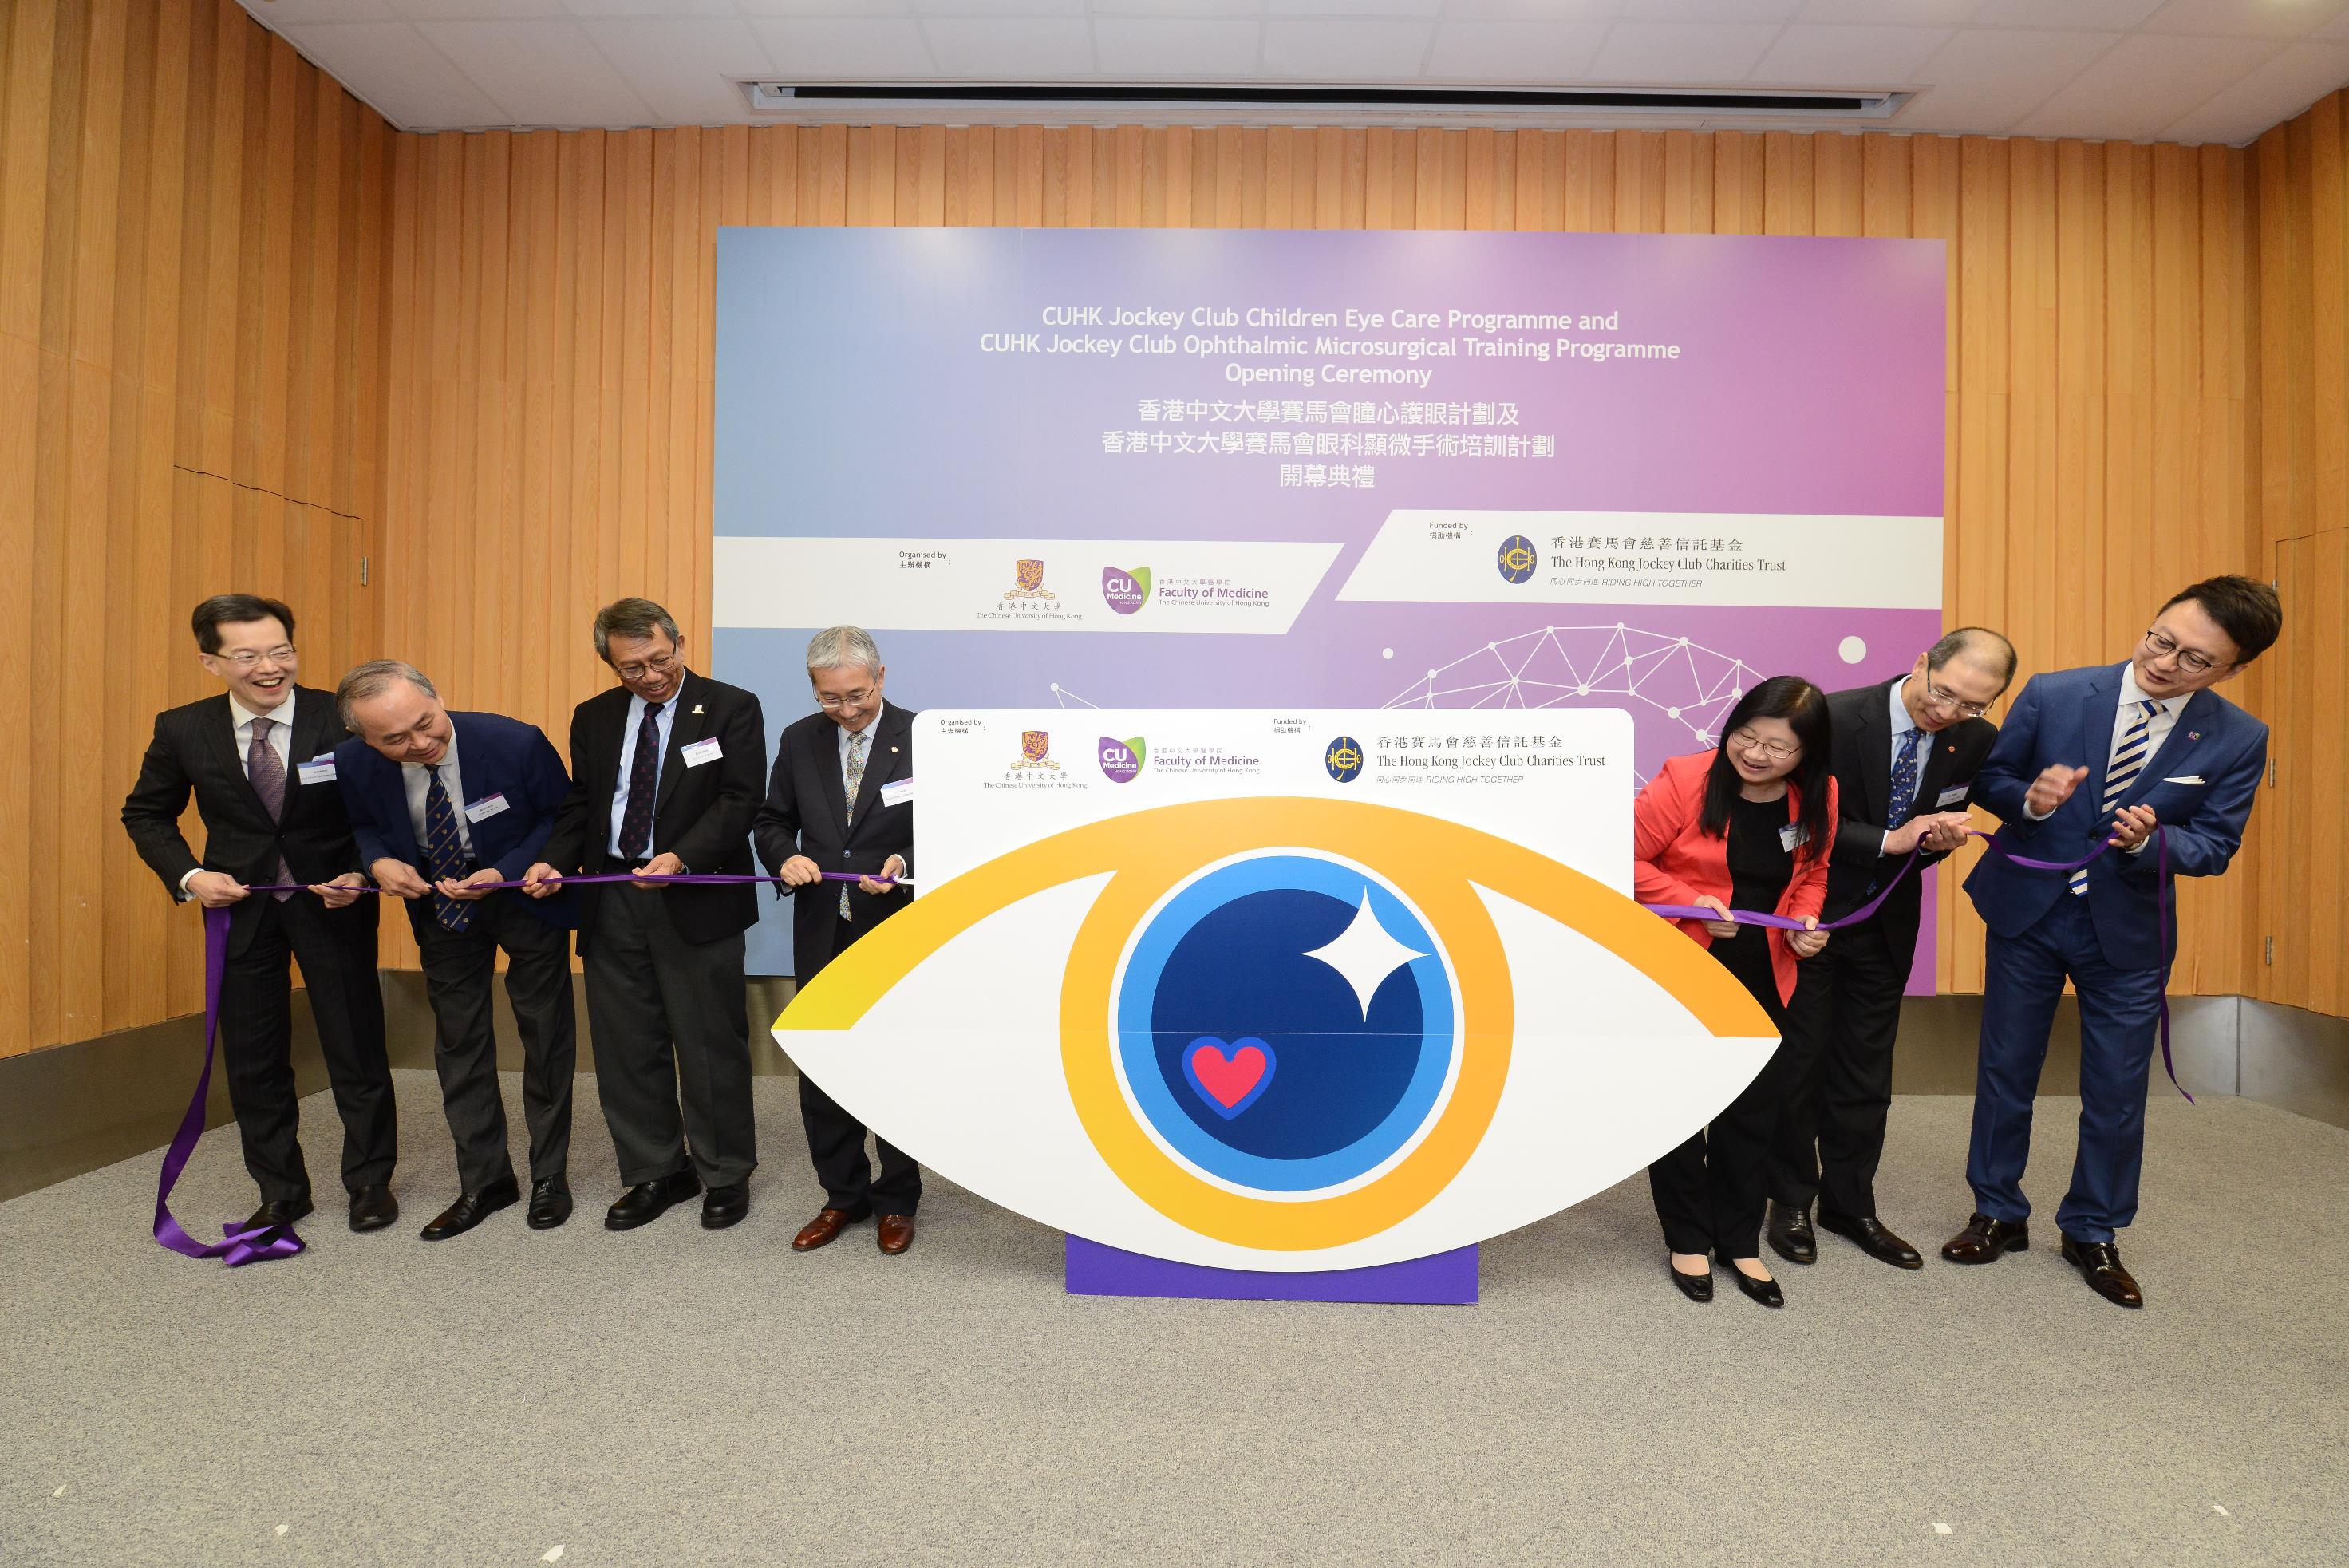 The Faculty of Medicine at The Chinese University of Hong Kong (CUHK) received a generous donation from the Hong Kong Jockey Club (HKJC) for the establishment of two ophthalmology programmes, “CUHK Jockey Club Children’s Eye Care Programme” and “CUHK Jockey Club Ophthalmic Microsurgical Training Programme”. Officiating guests of the opening ceremony include (from left) Professor Clement Chee Yung THAM, Chairman, Department of Ophthalmology and Visual Sciences, Faculty of Medicine at CUHK; Professor FOK Tai-fai, Pro-Vice-Chancellor of CUHK; Professor Rocky S. TUAN, Vice-Chancellor and President of CUHK; Professor John LEONG Chi-yan, Chairman of the Hospital Authority; Ms. Imelda CHAN, Head of Charities (Grant Making - Elderly, Rehabilitation, Medical, Environment & Family), HKJC; Dr. Albert LO, Cluster Chief Executive, Kowloon Central Cluster, Hospital Authority; and Professor Francis CHAN, Dean of the Faculty of Medicine at CUHK.